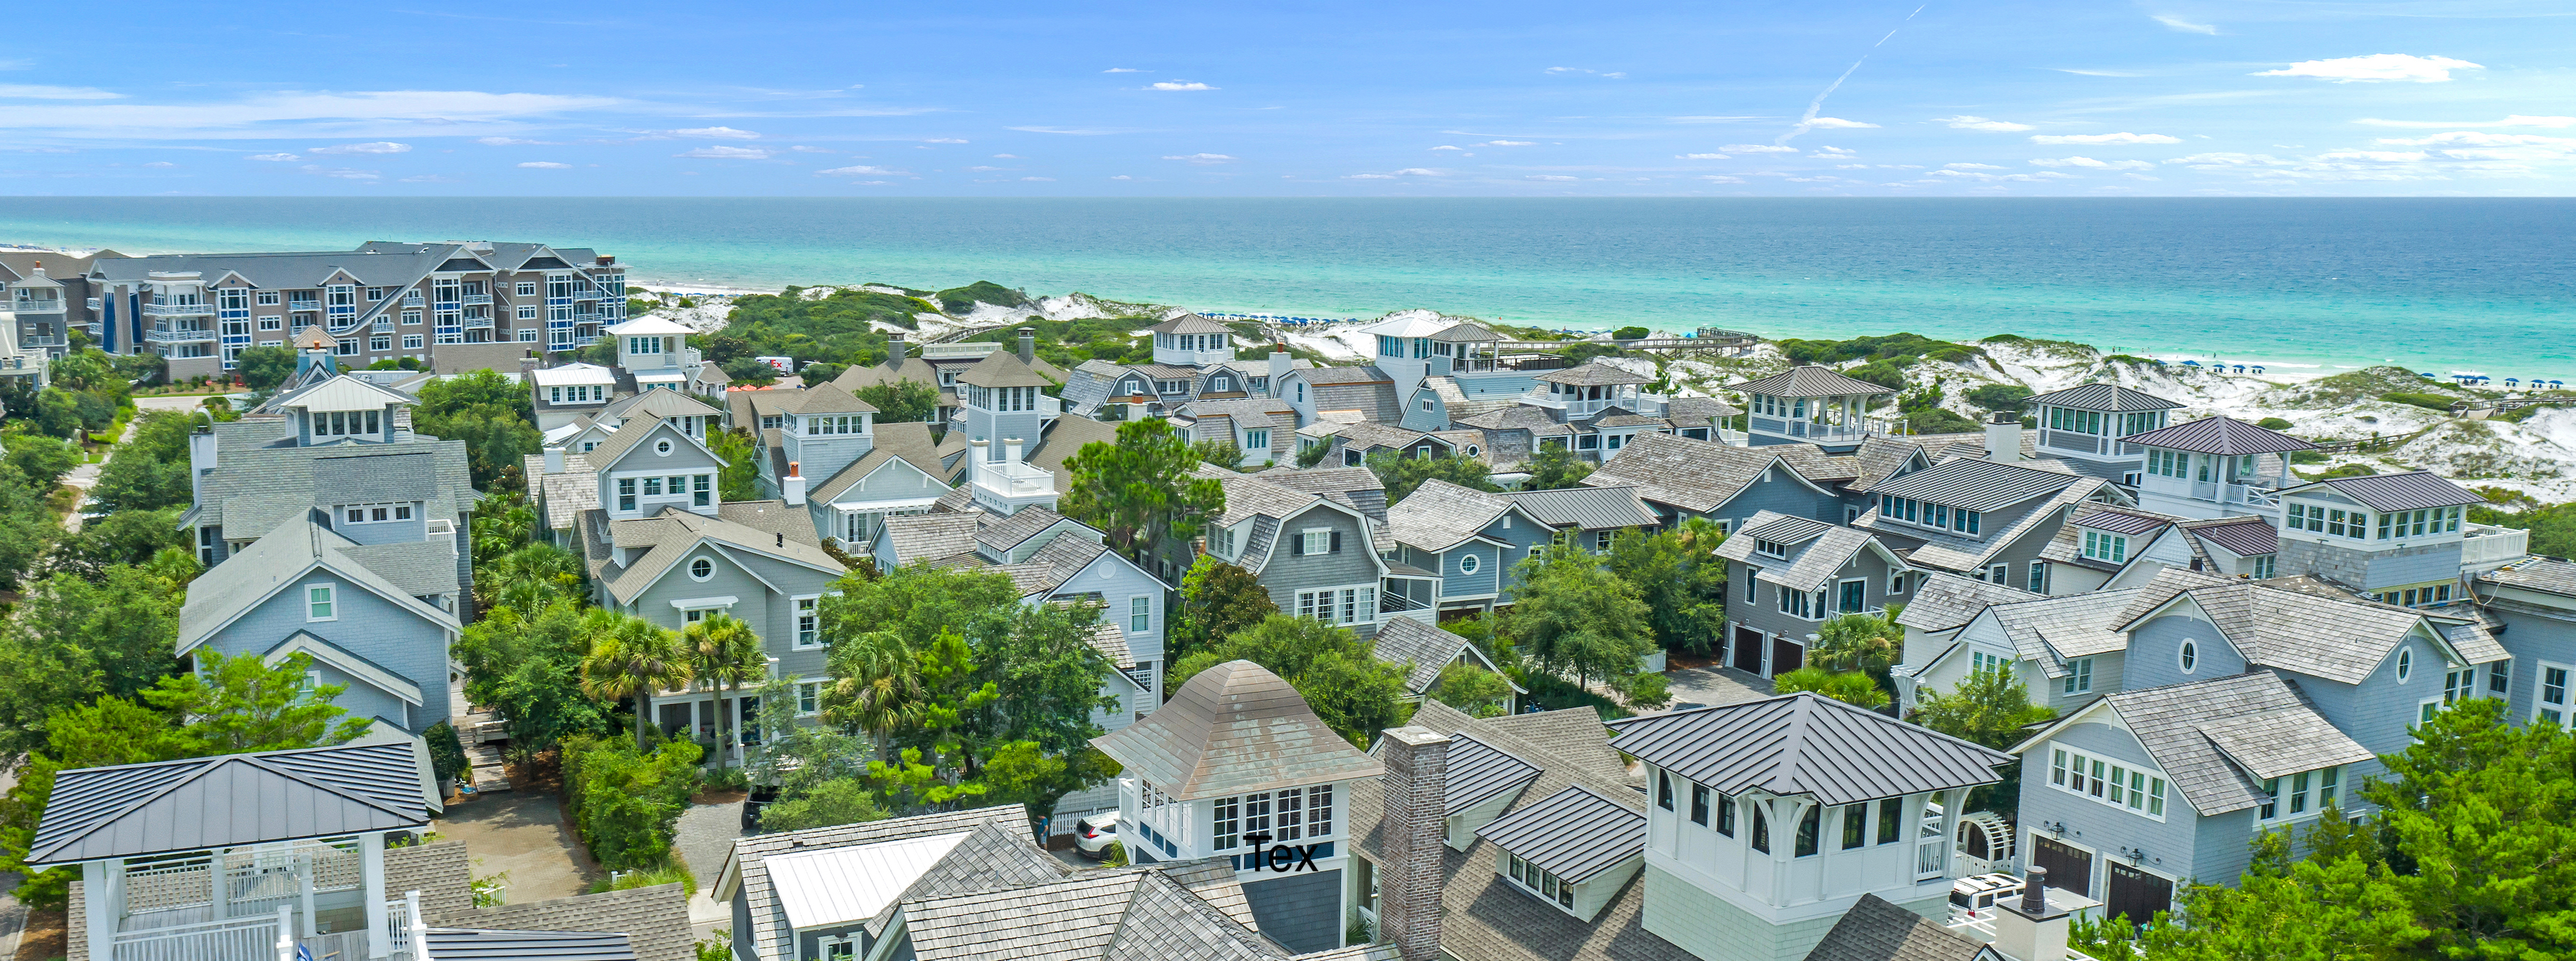 An aerial view of homes at Watersound West Beach with the gulf in the background on a pleasant sunny day